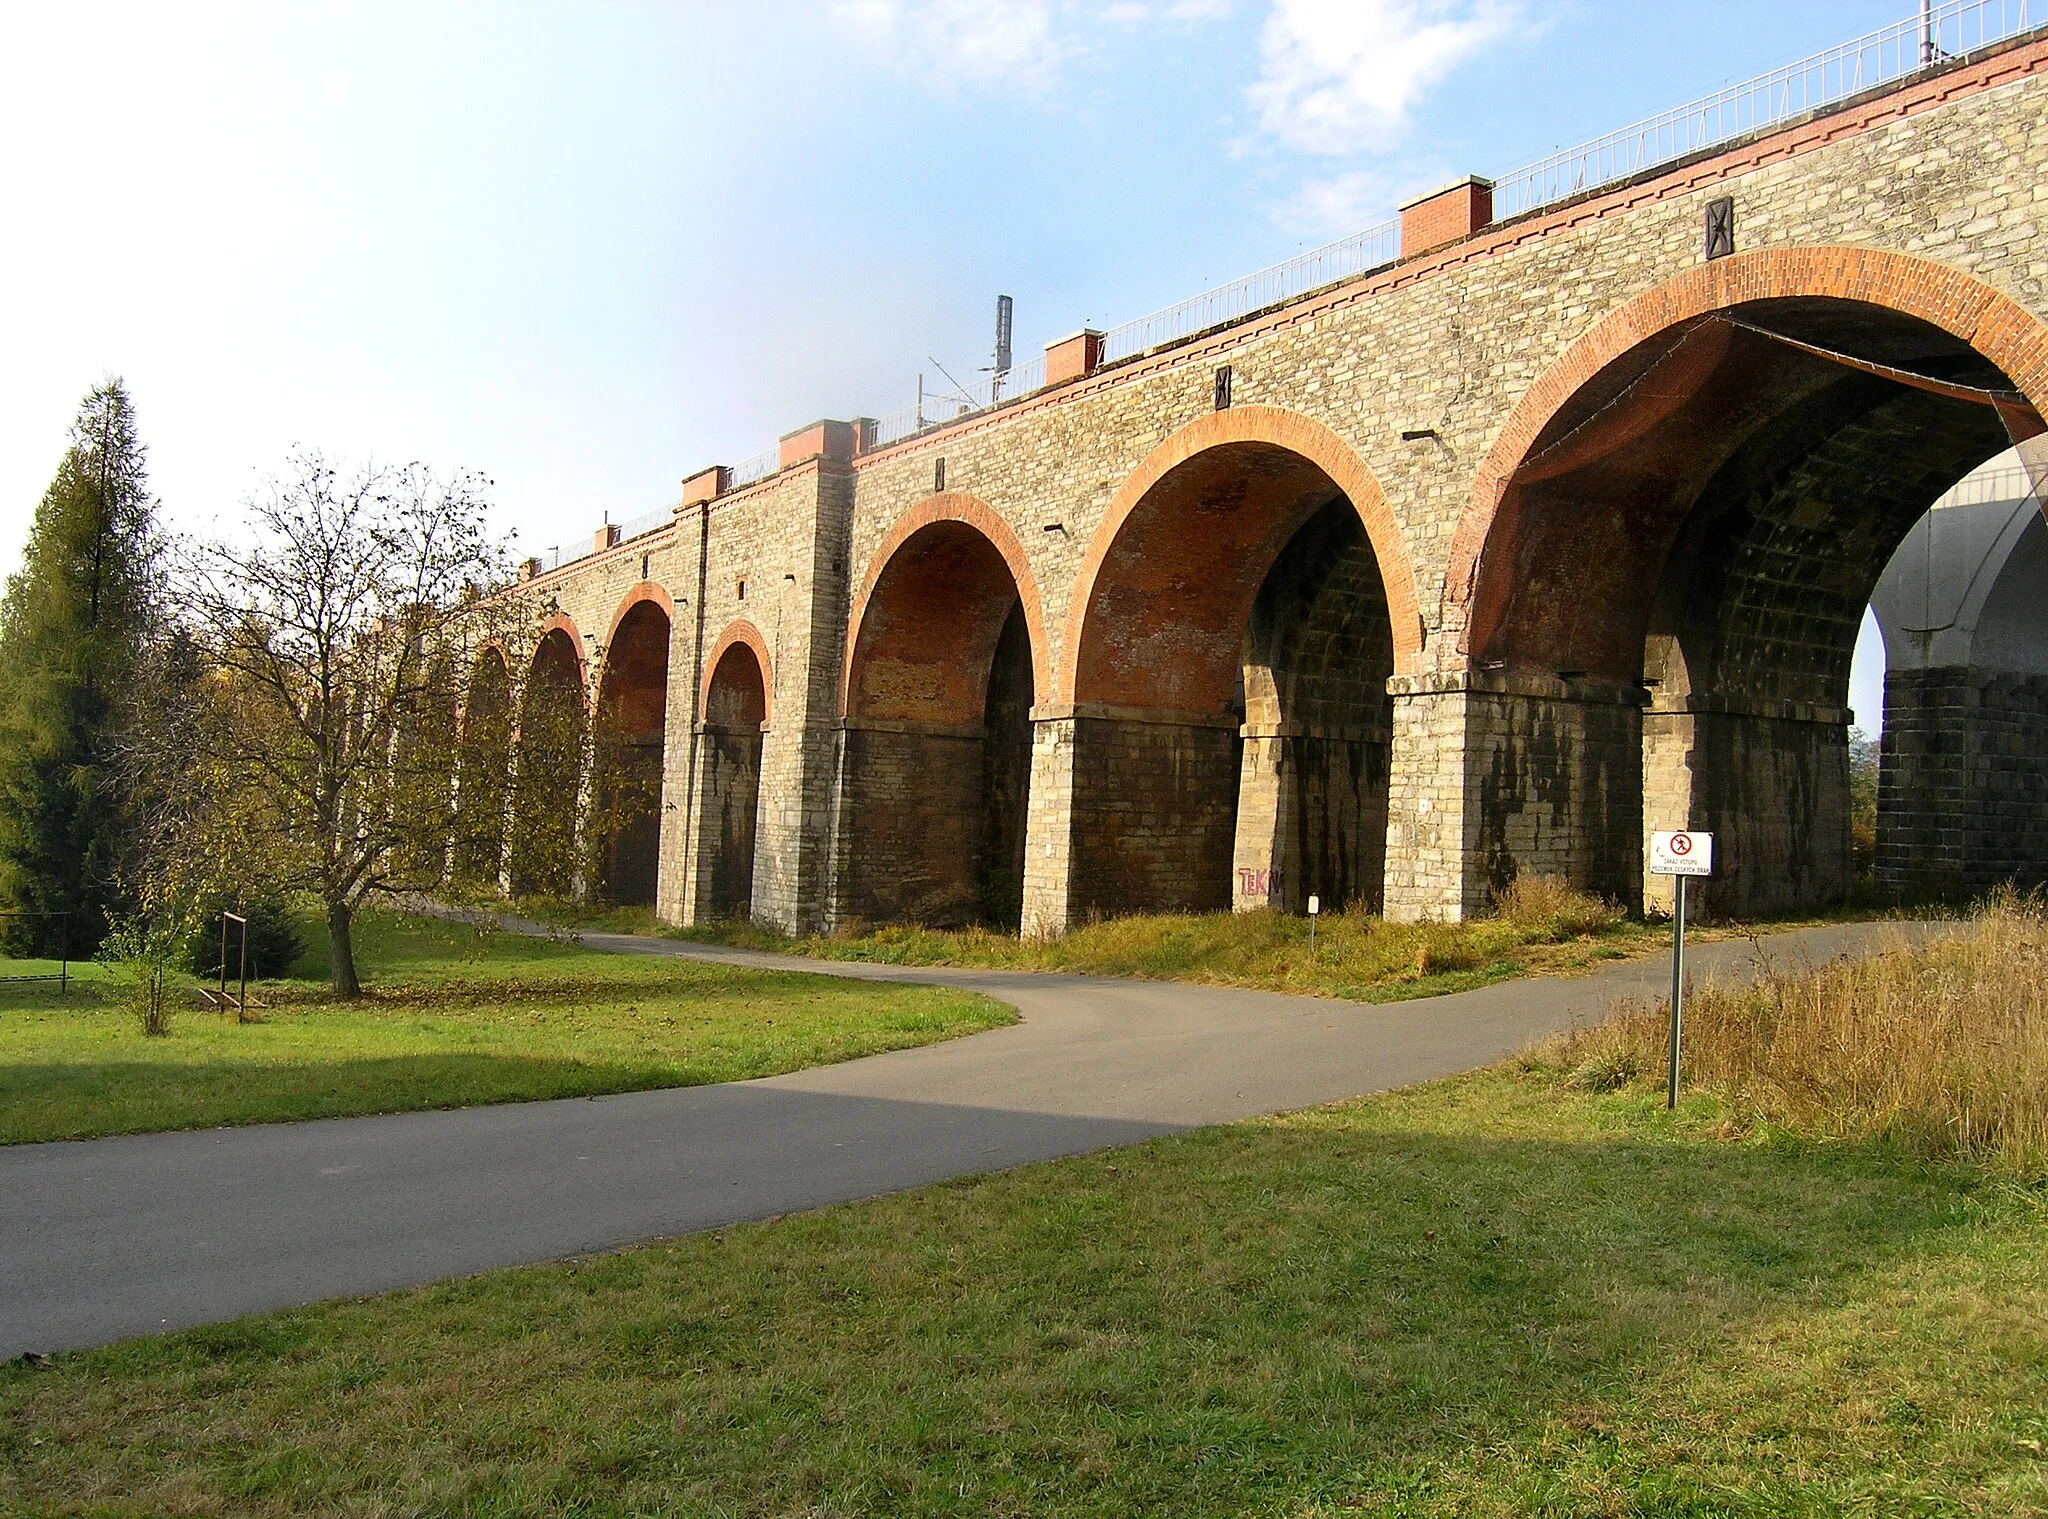 Photo showing: Technical monument Hranice Viaducts in Hranice, Czech Republic